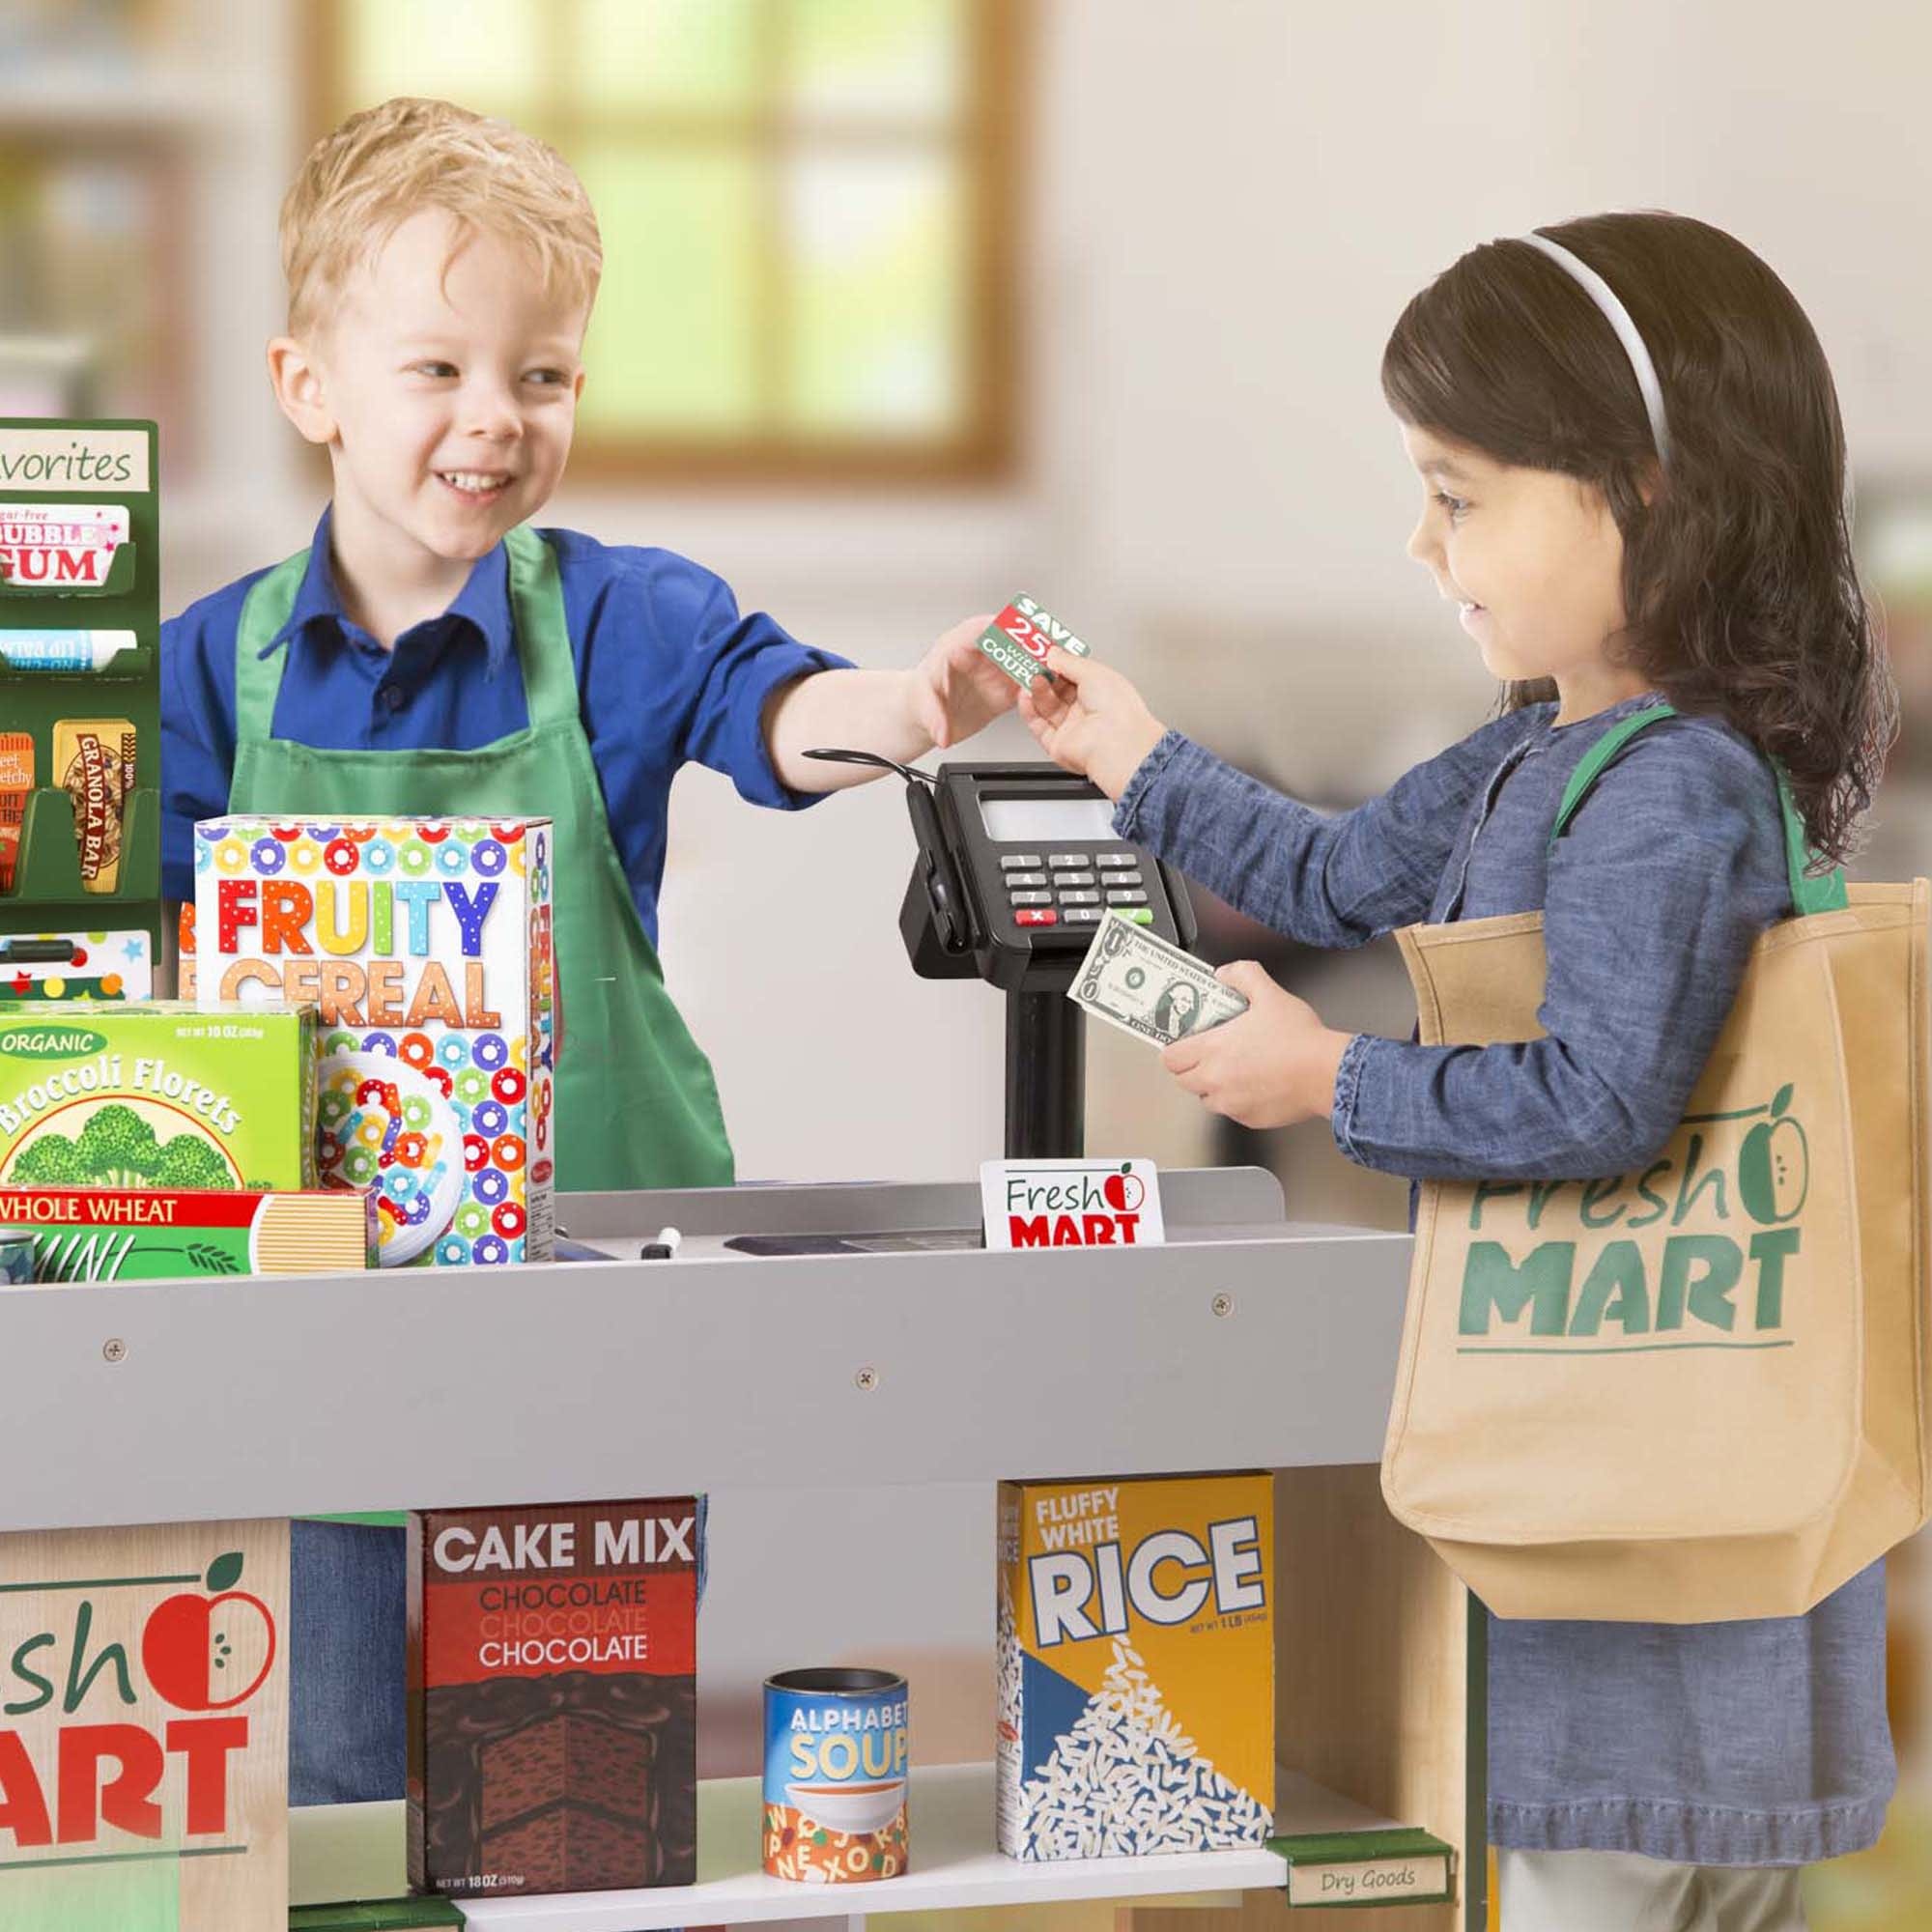 Toys & Games Melissa & Doug Fresh Mart Grocery Store Collection